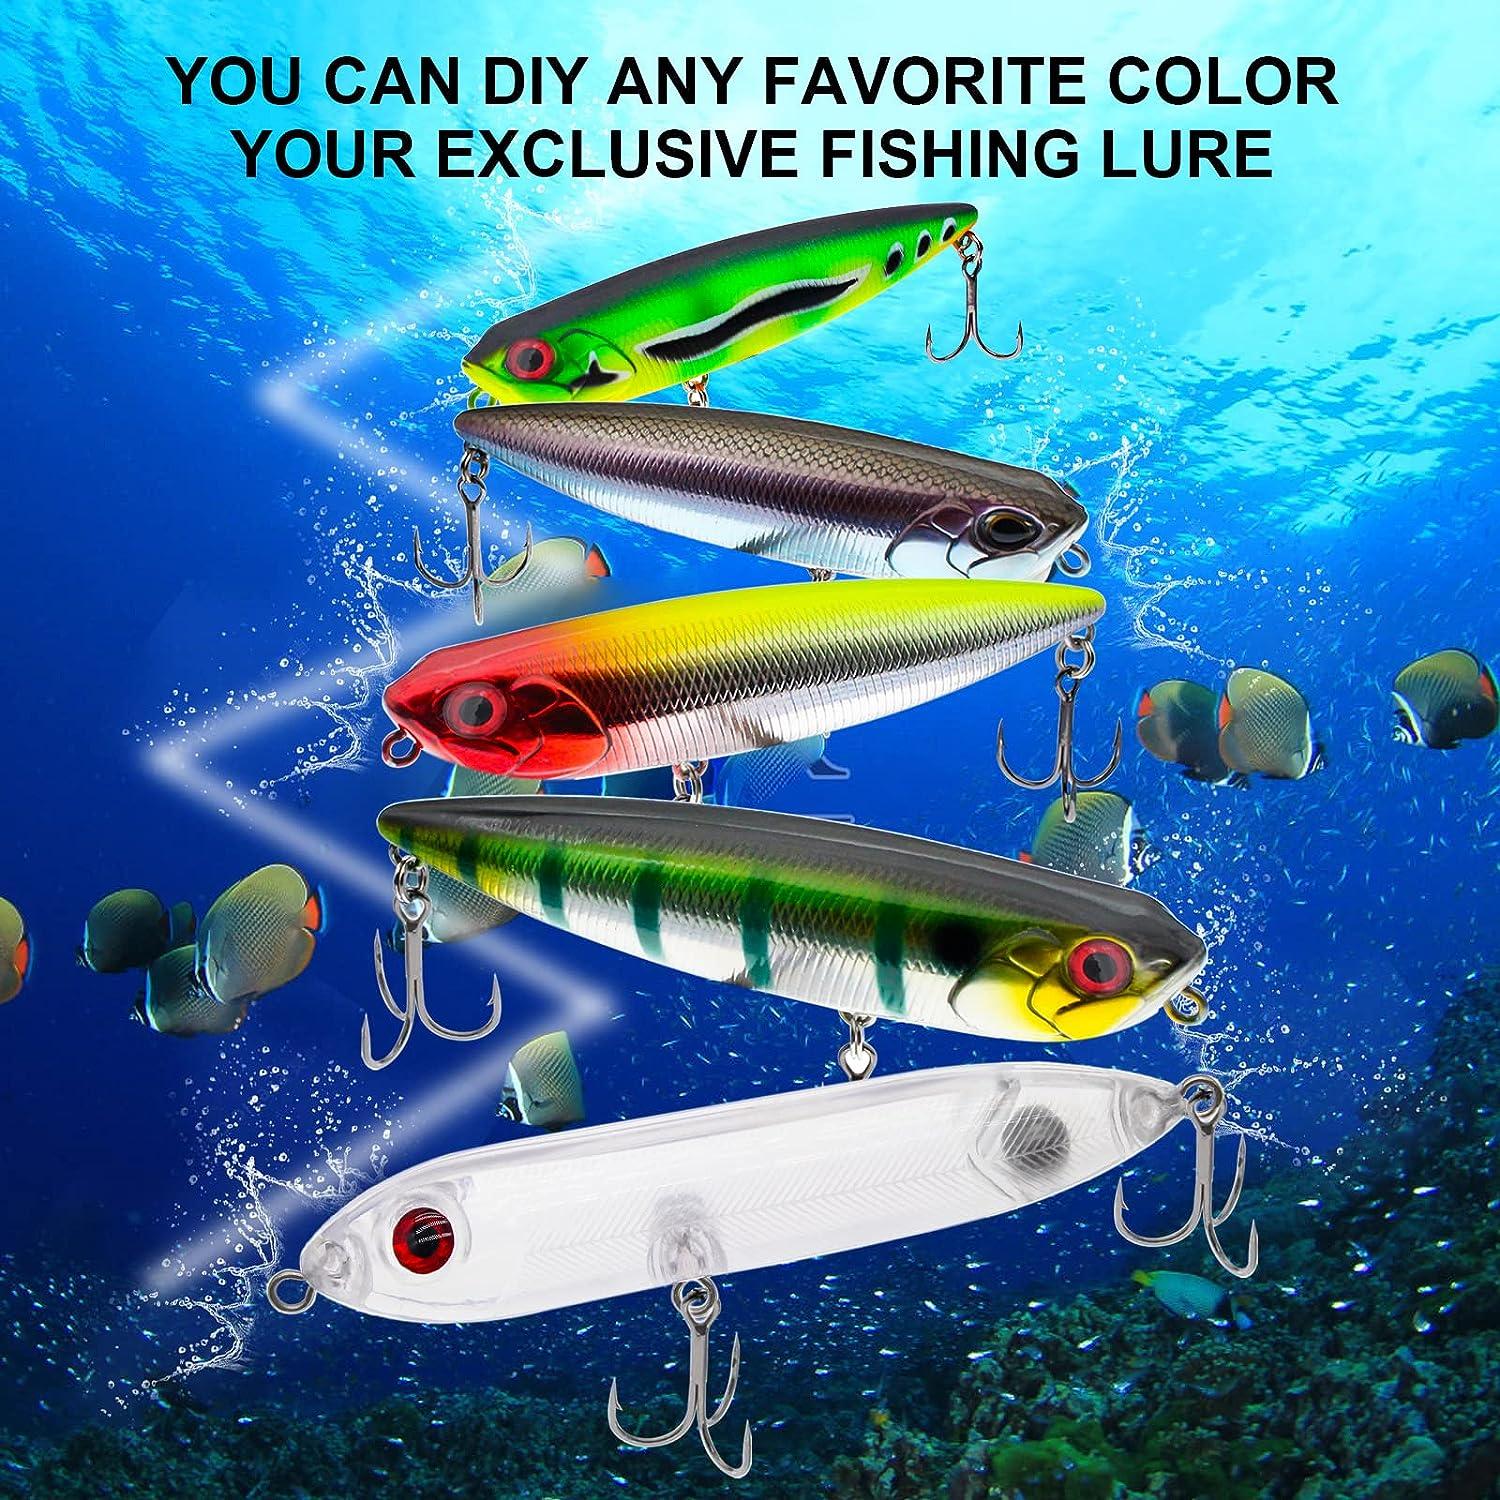 Ghanneey Fishing Blanks Lures Kit Fishing Topwater Unpainted Swimbait Unpainted  Crankbaits Hard Baits DIY Lure for Bass Salmon Trout Saltwater and  Freshwater B:Blanks Fishing Lures 20pcs 0.35oz/10g